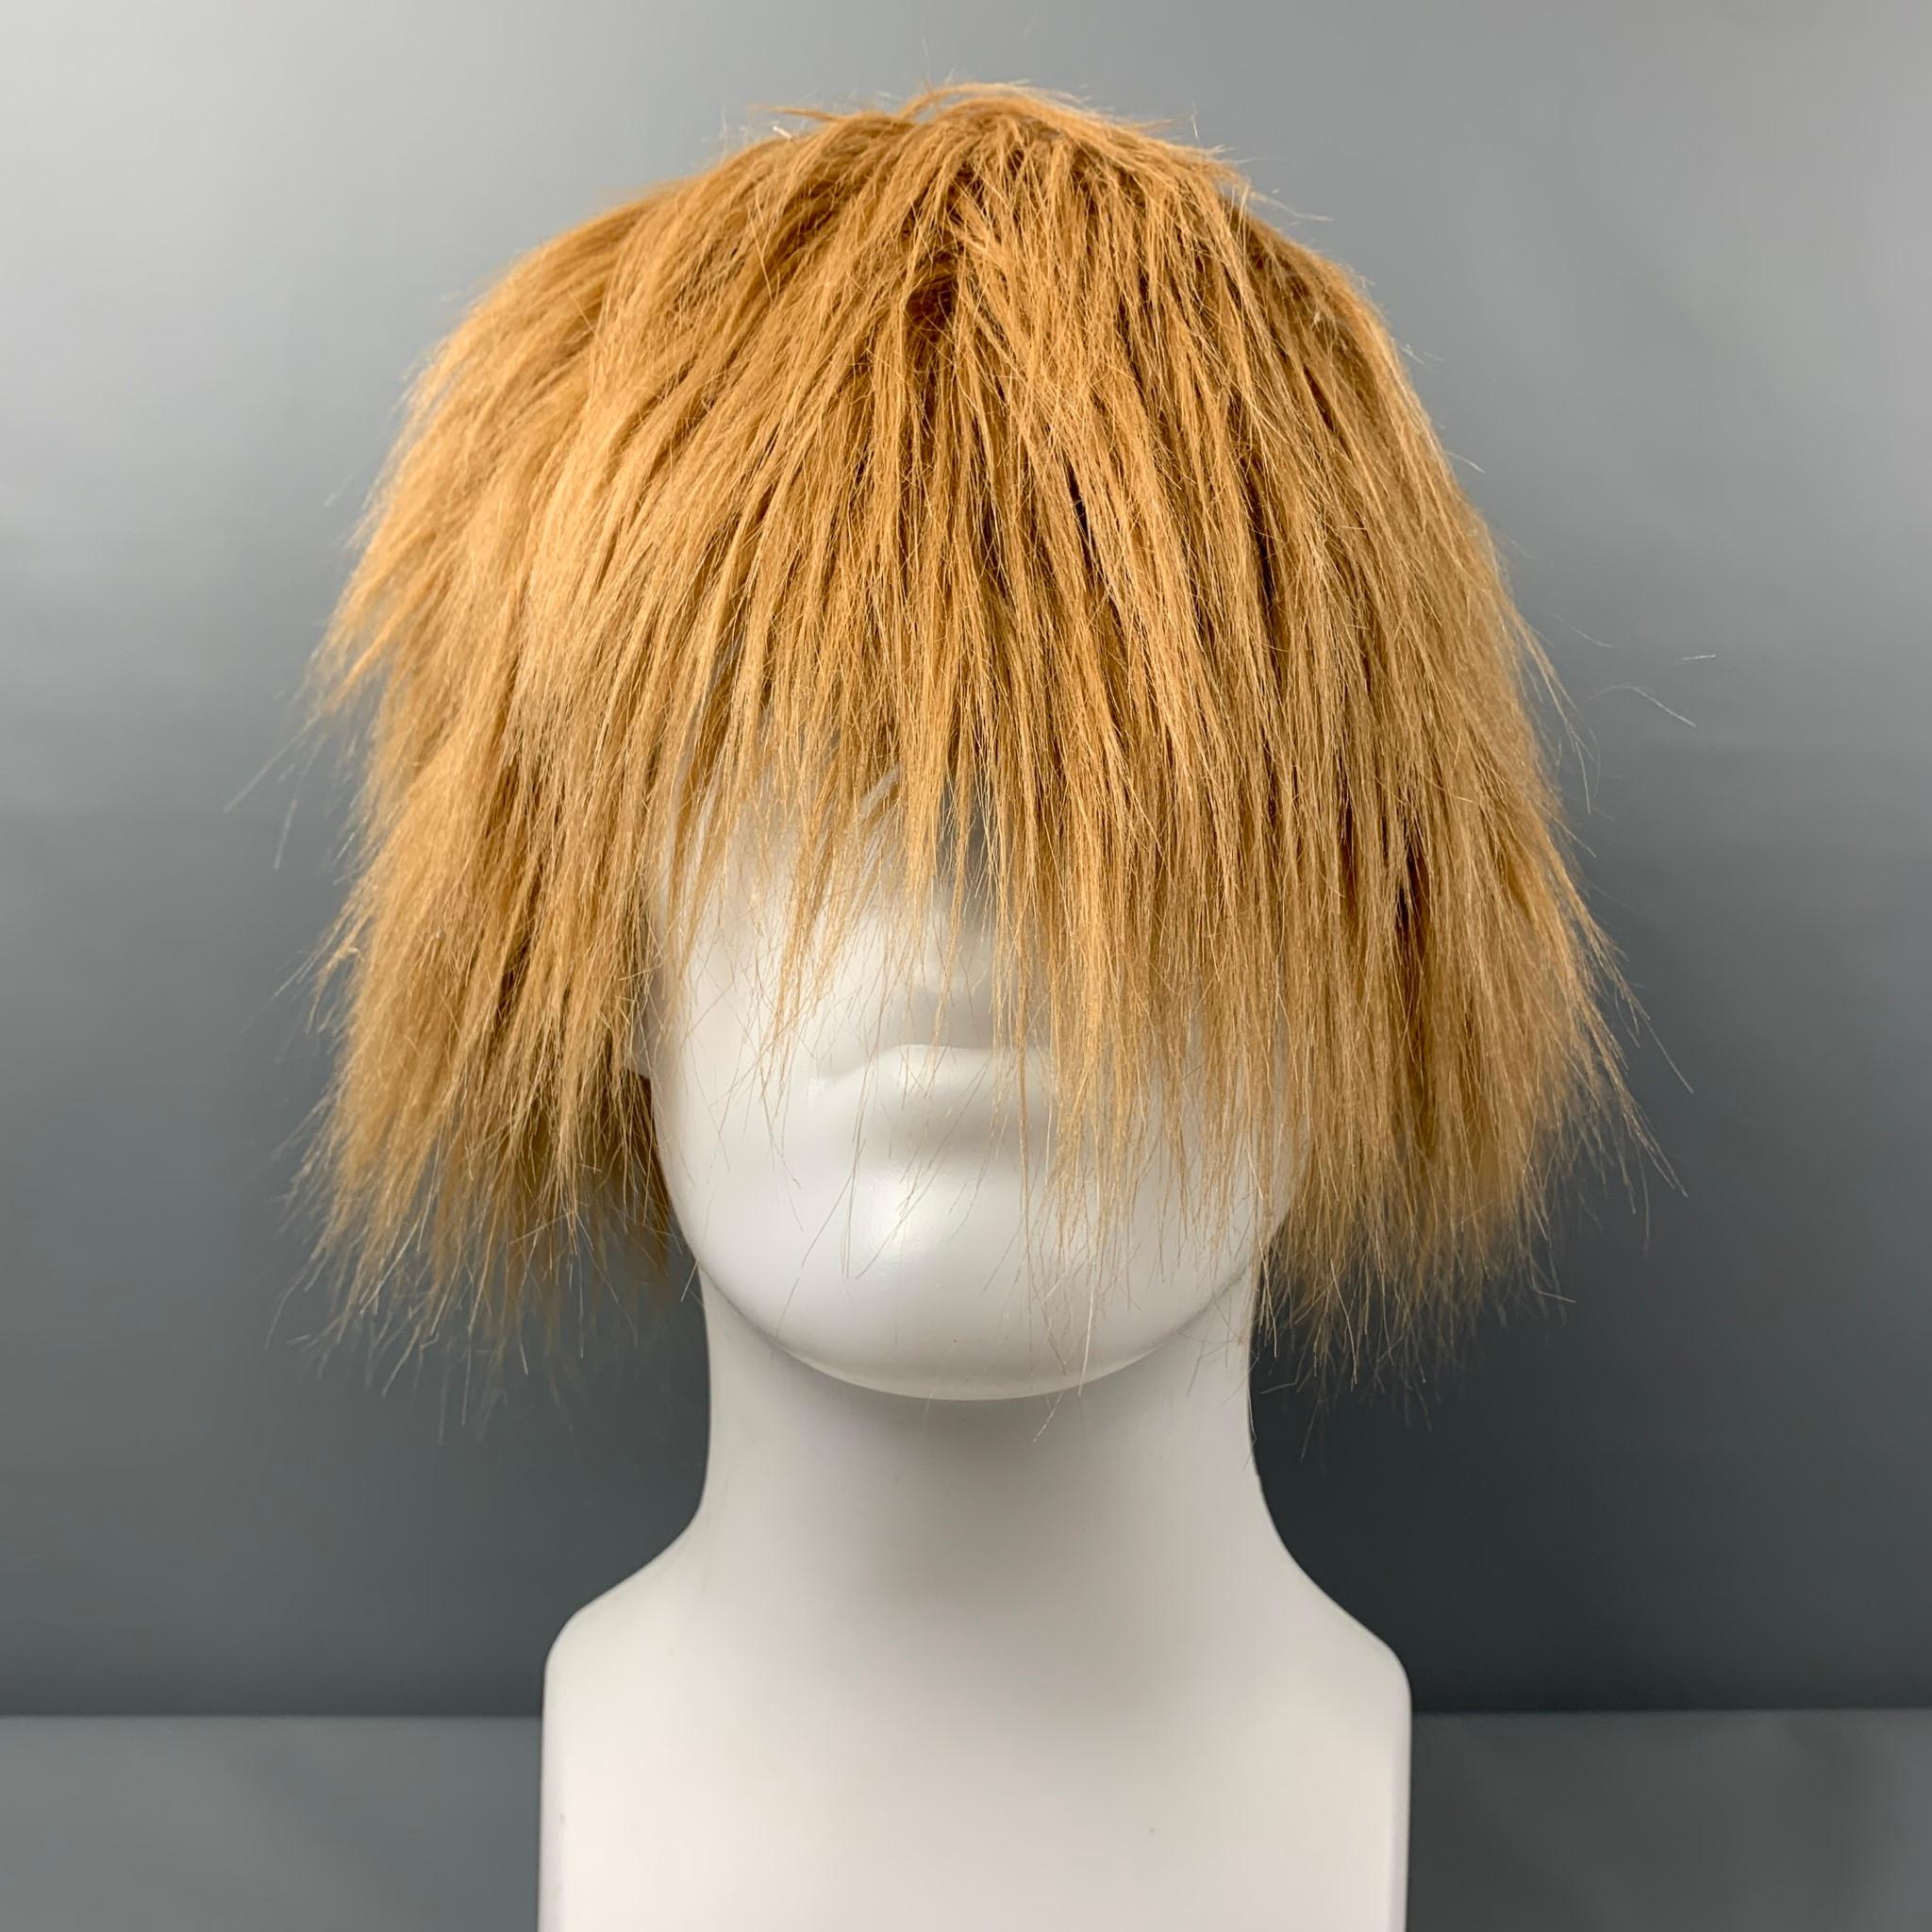 MM6 MAISON MARGIELA 2016 Re-Issue hat comes in tan faux fur featuring a overlapping design. 

Very Good Pre-Owned Condition.
Marked: S

Measurements:

Opening: 28 in. 